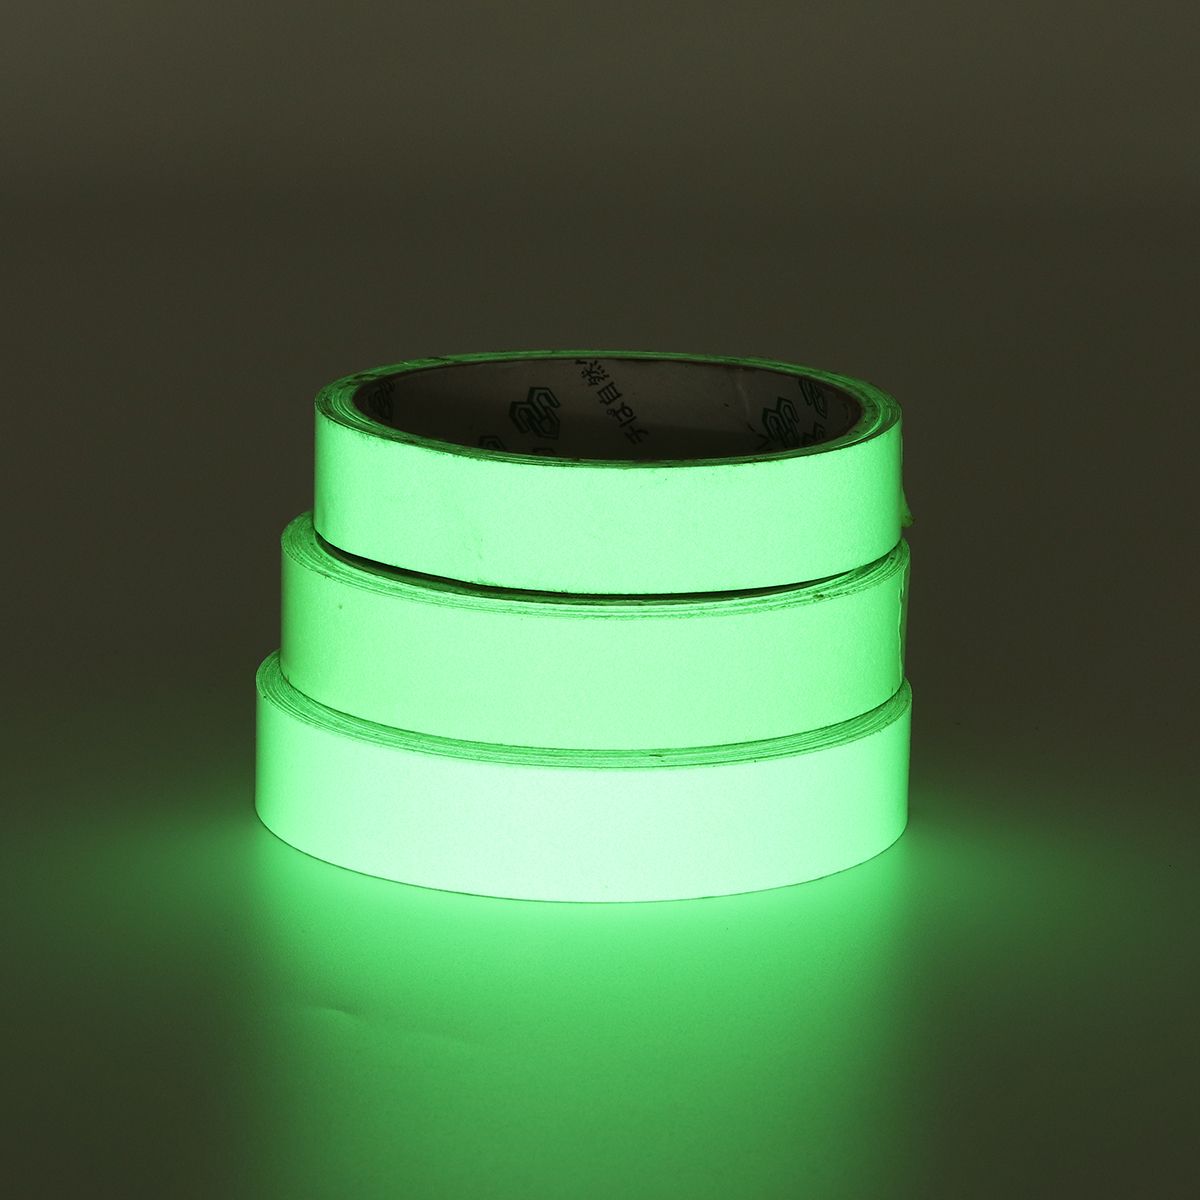 Luminous-Glow-In-The-Dark-Sticky-Reflective-Tape-Self-Adhesive-Safety-Film-Sticker-1668262